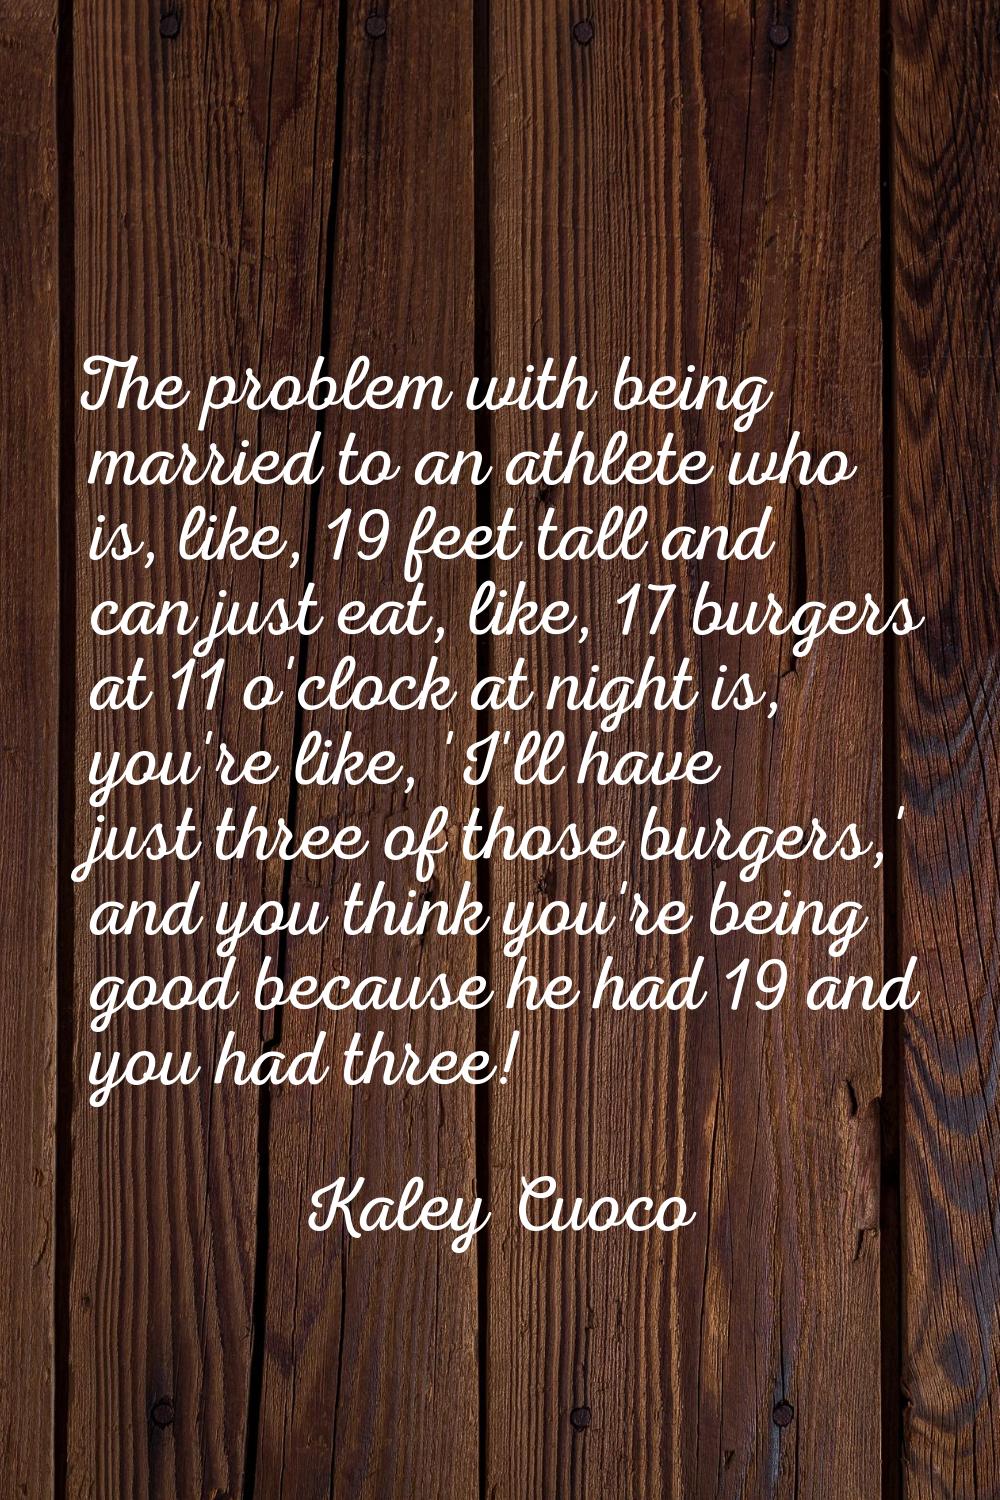 The problem with being married to an athlete who is, like, 19 feet tall and can just eat, like, 17 